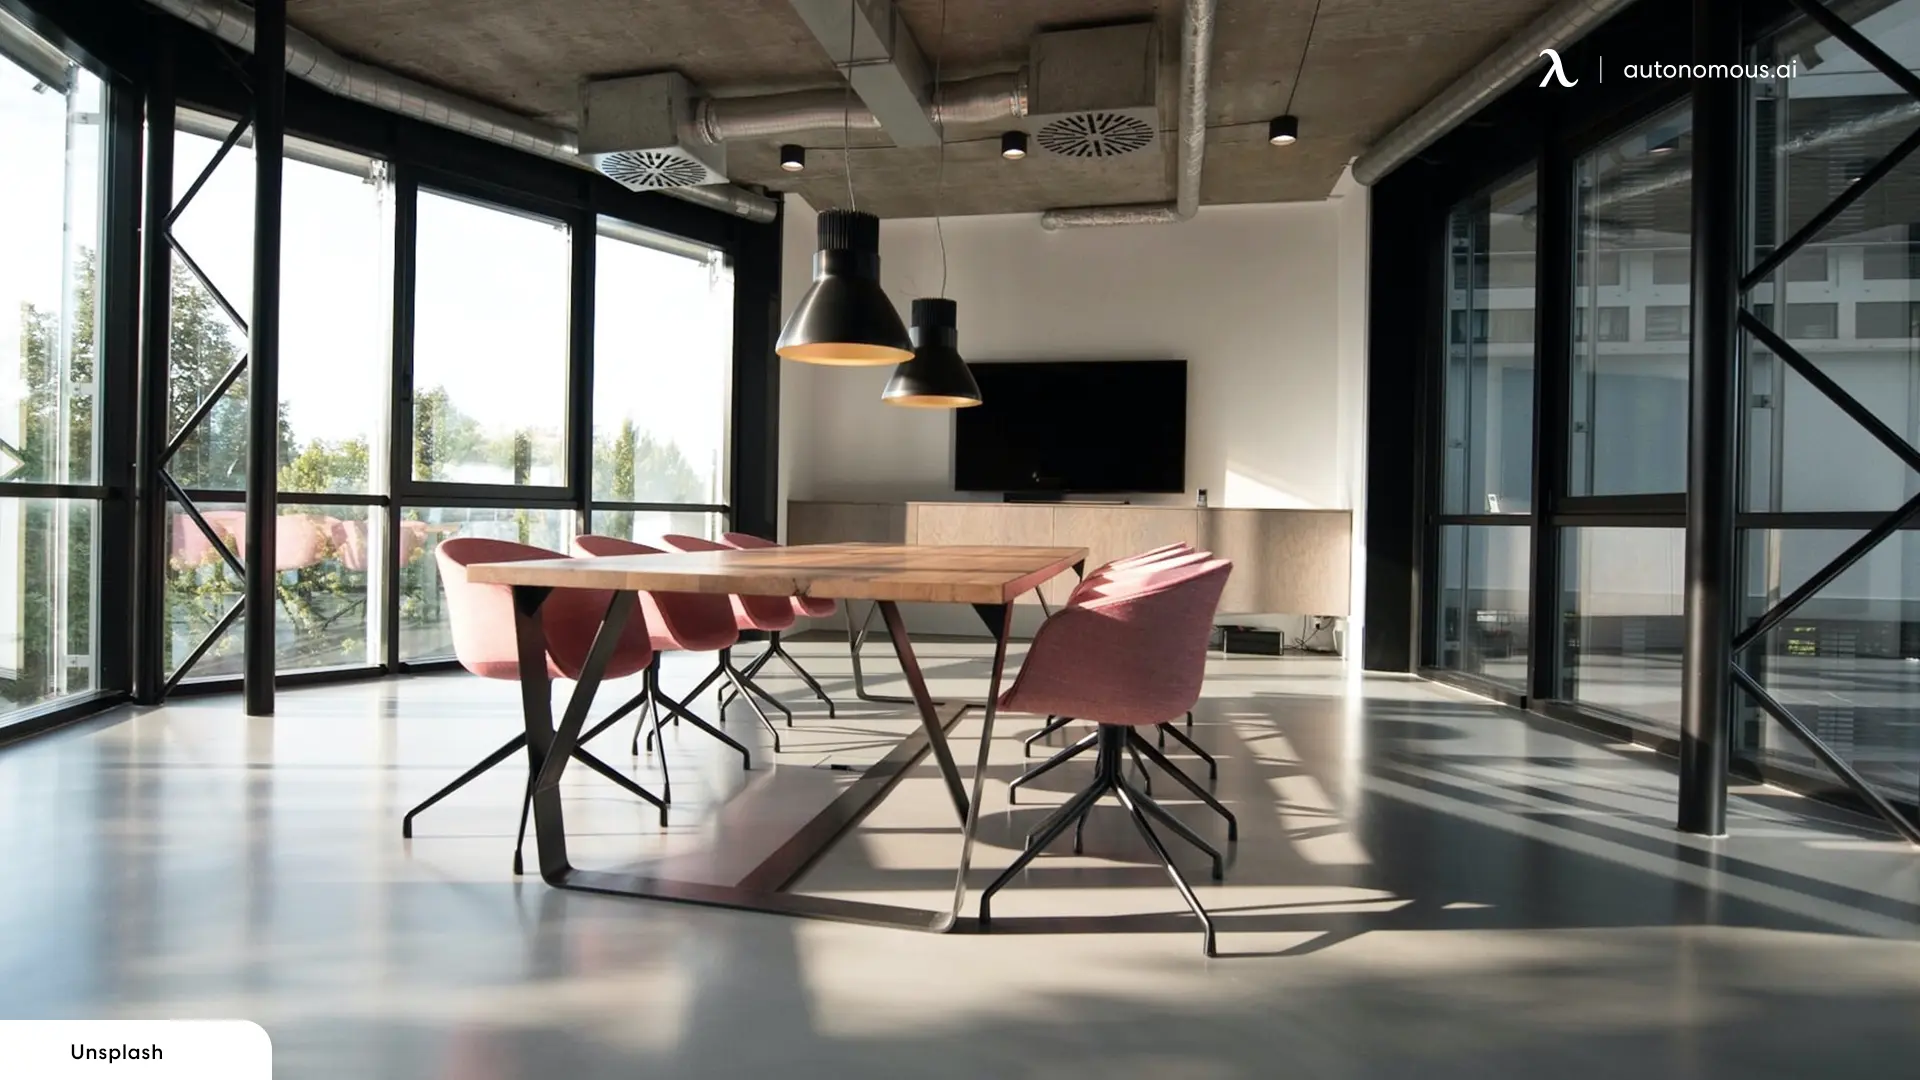 Choose an Office Room with Maximum Natural Light